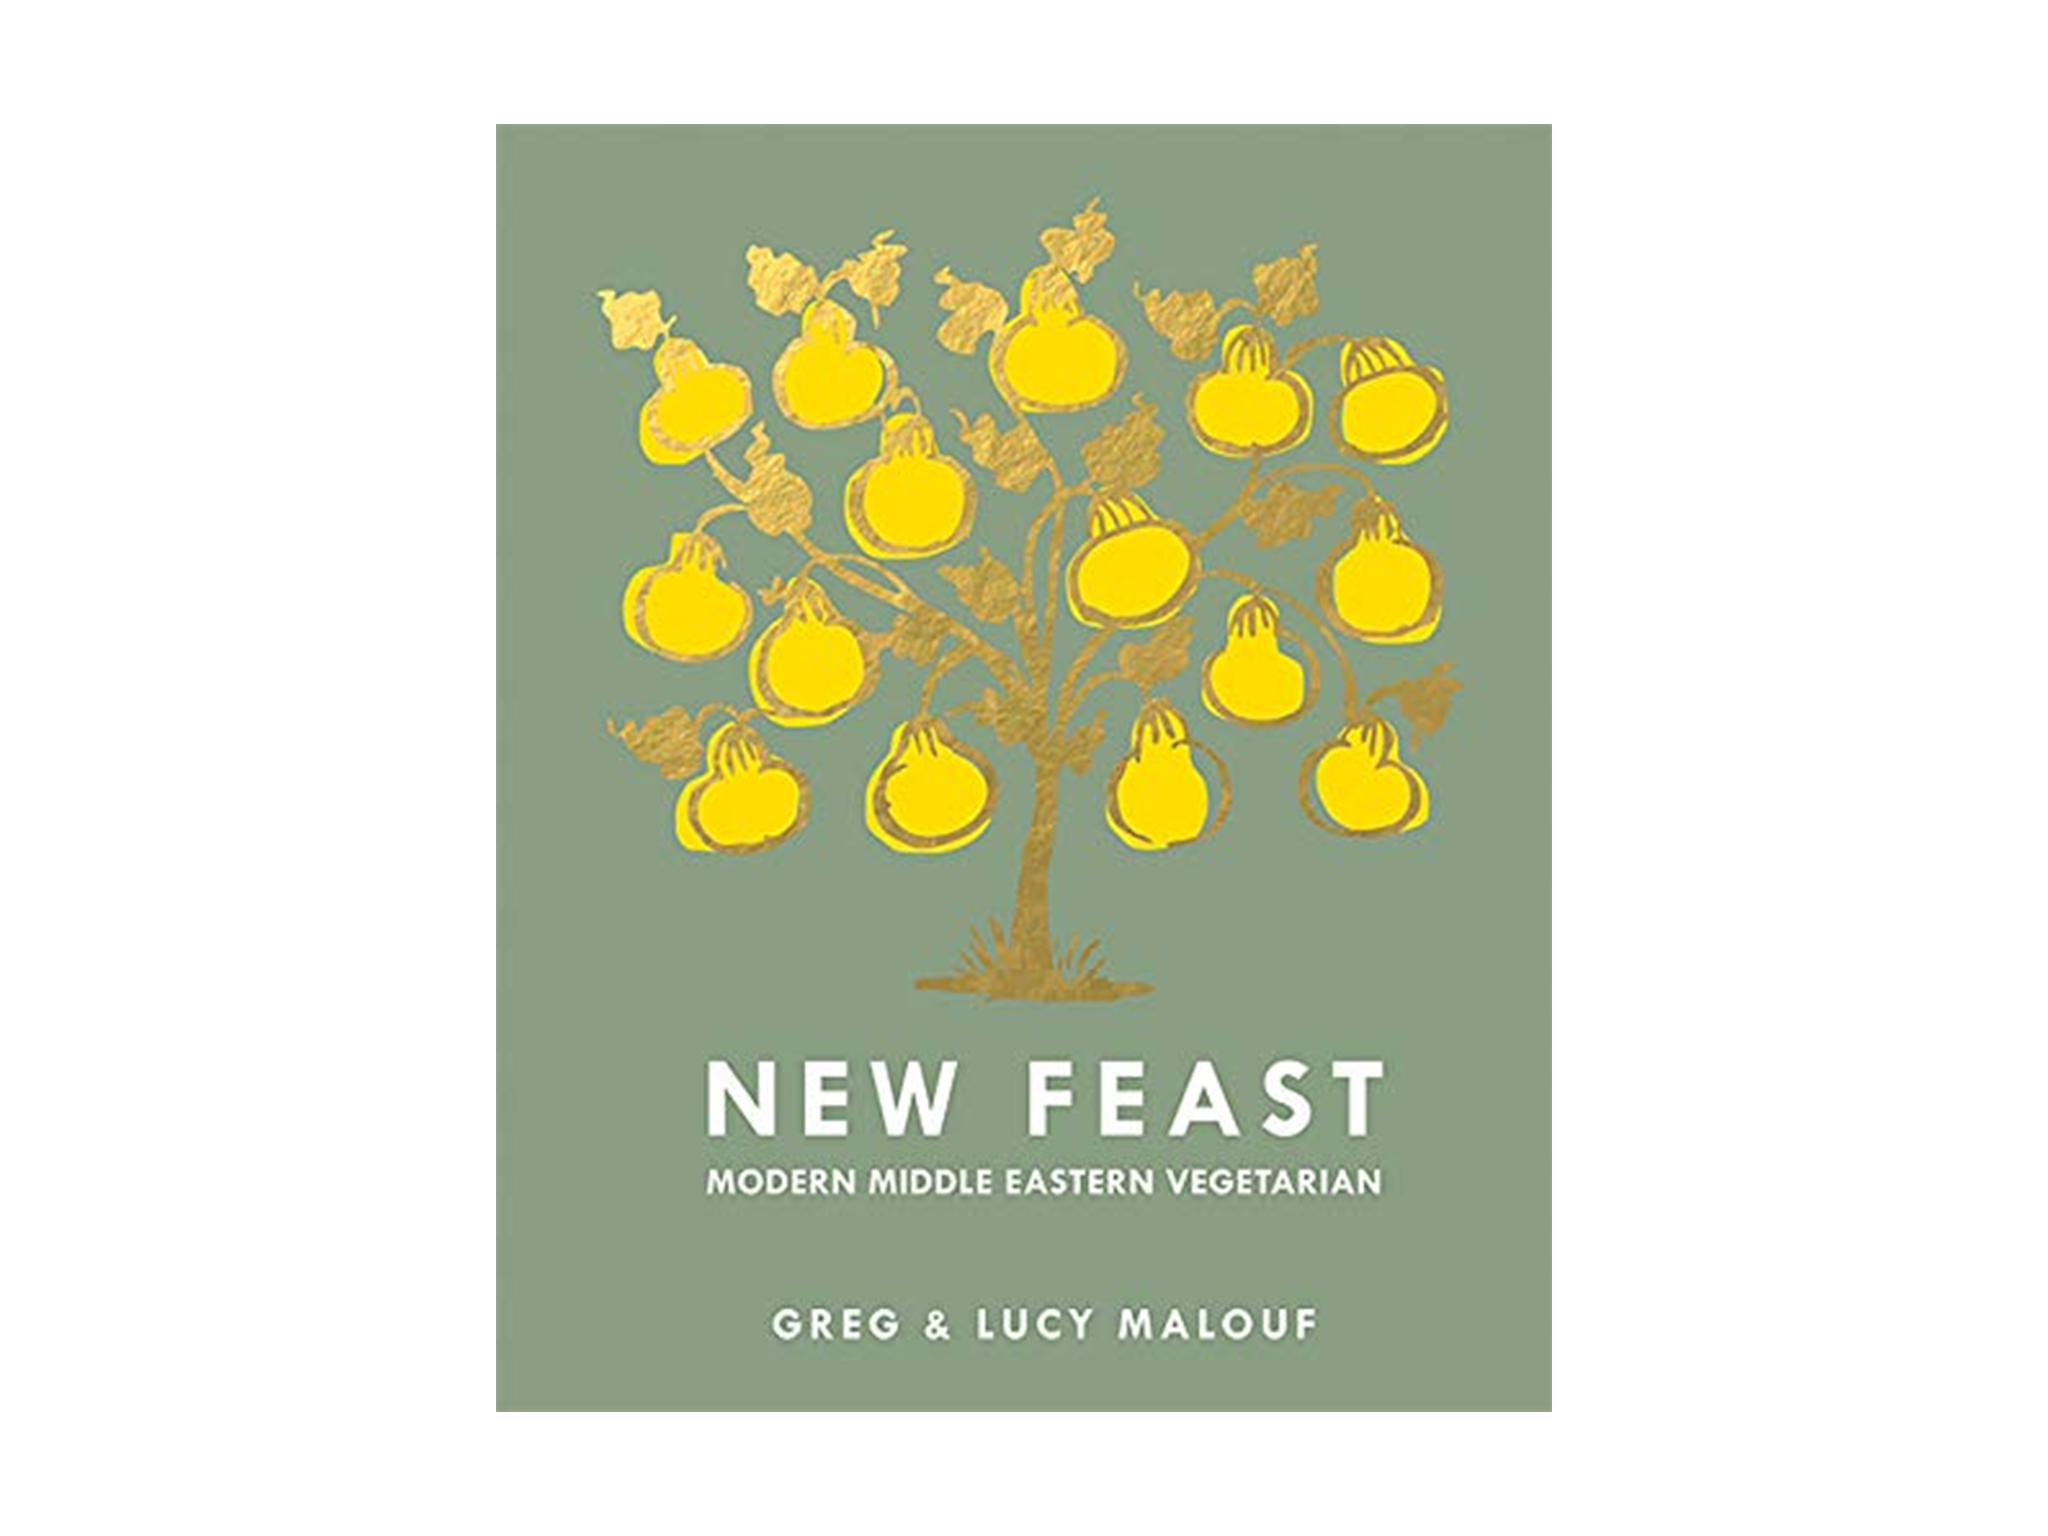 ‘New Feast: Modern Middle Eastern Vegetarian’ by Greg and Lucy Malouf, published by Quadrille Publishing